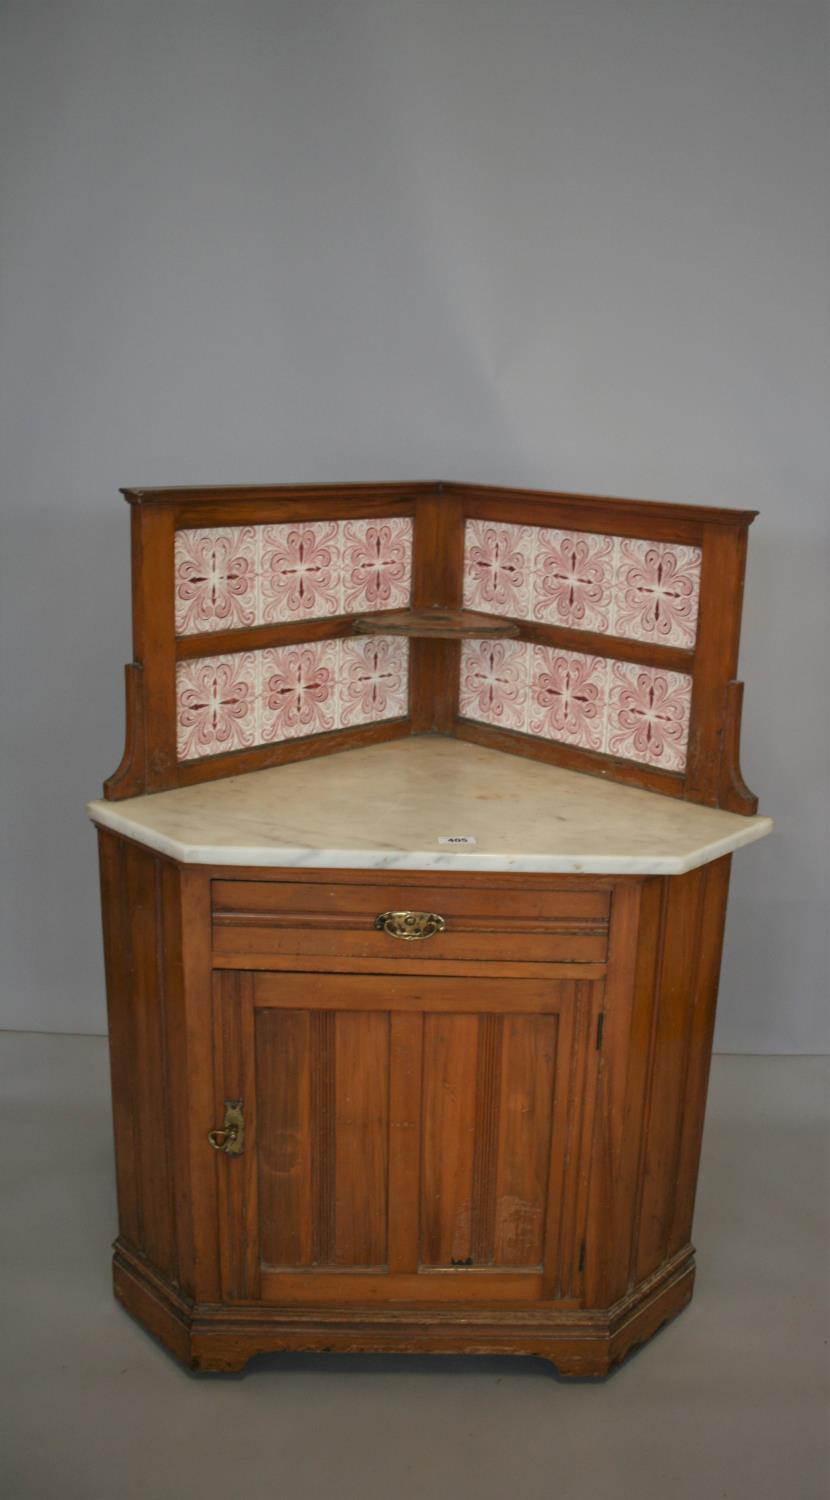 Unusual Art Nouveau walnut corner wash stand with tiled back and marble top. 93W x 122H x 67H